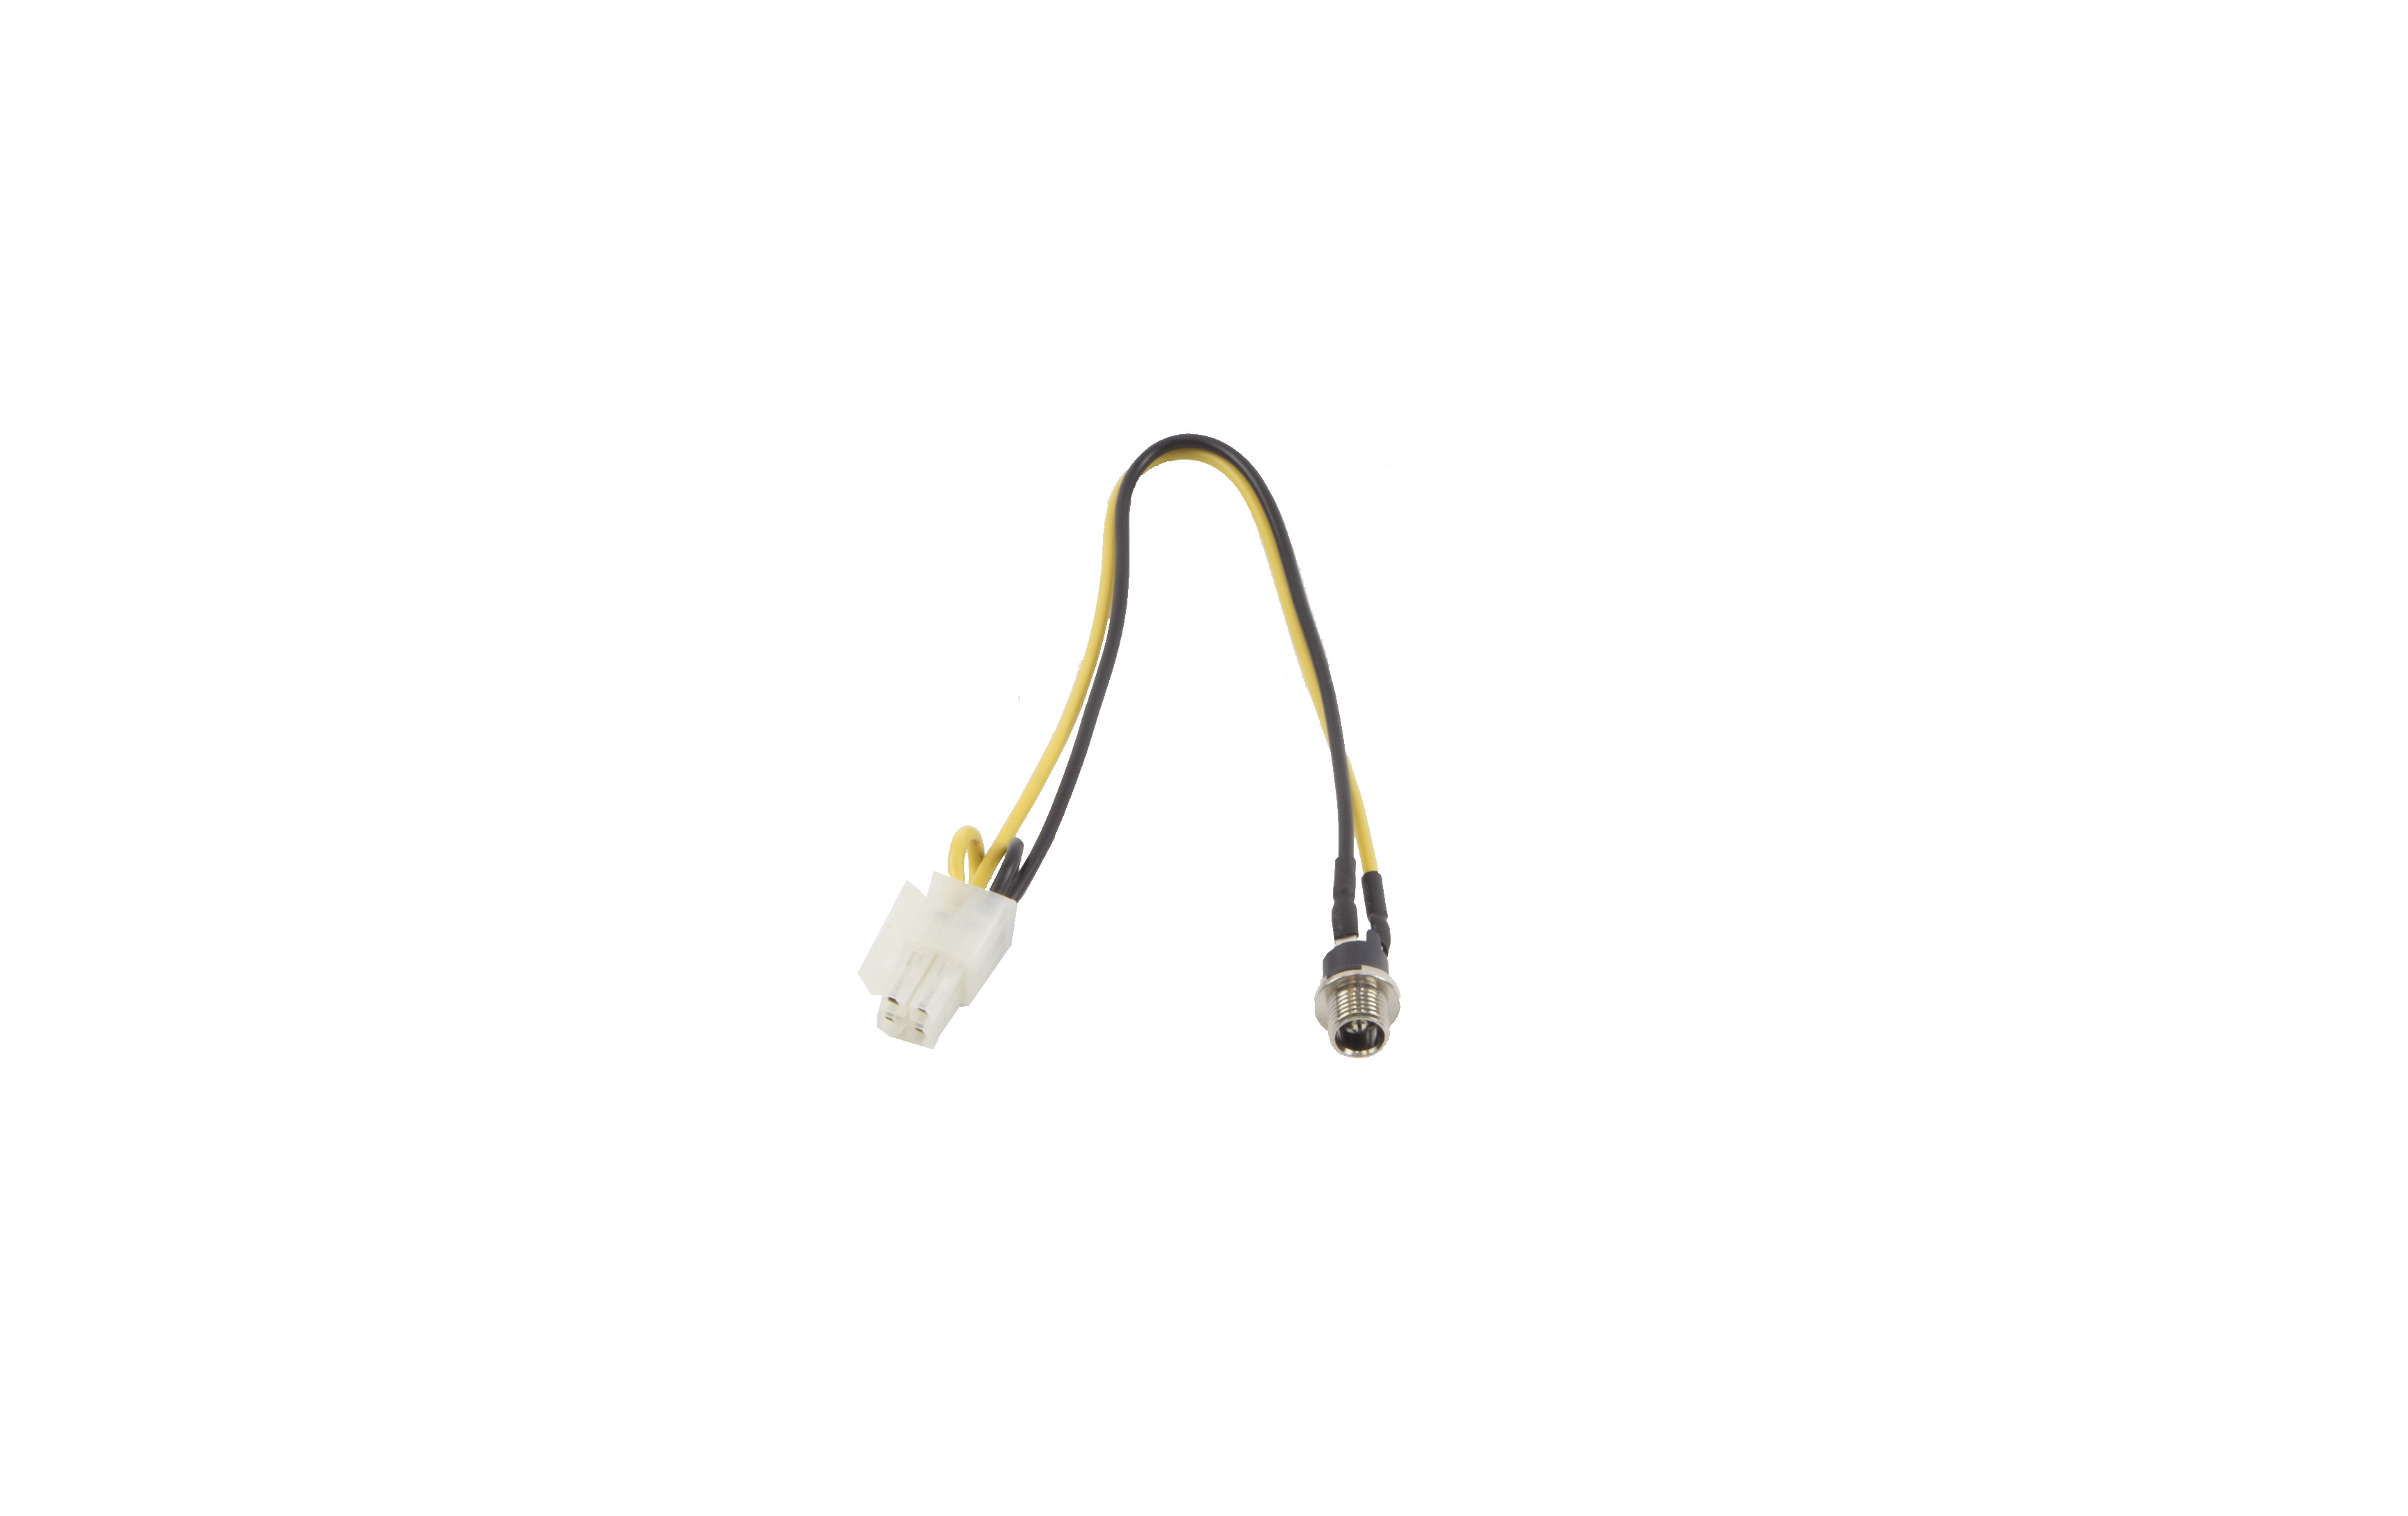 SW LED CABLE(FOR Nano & Pico)  |Products|Accessories|Cable & Cord